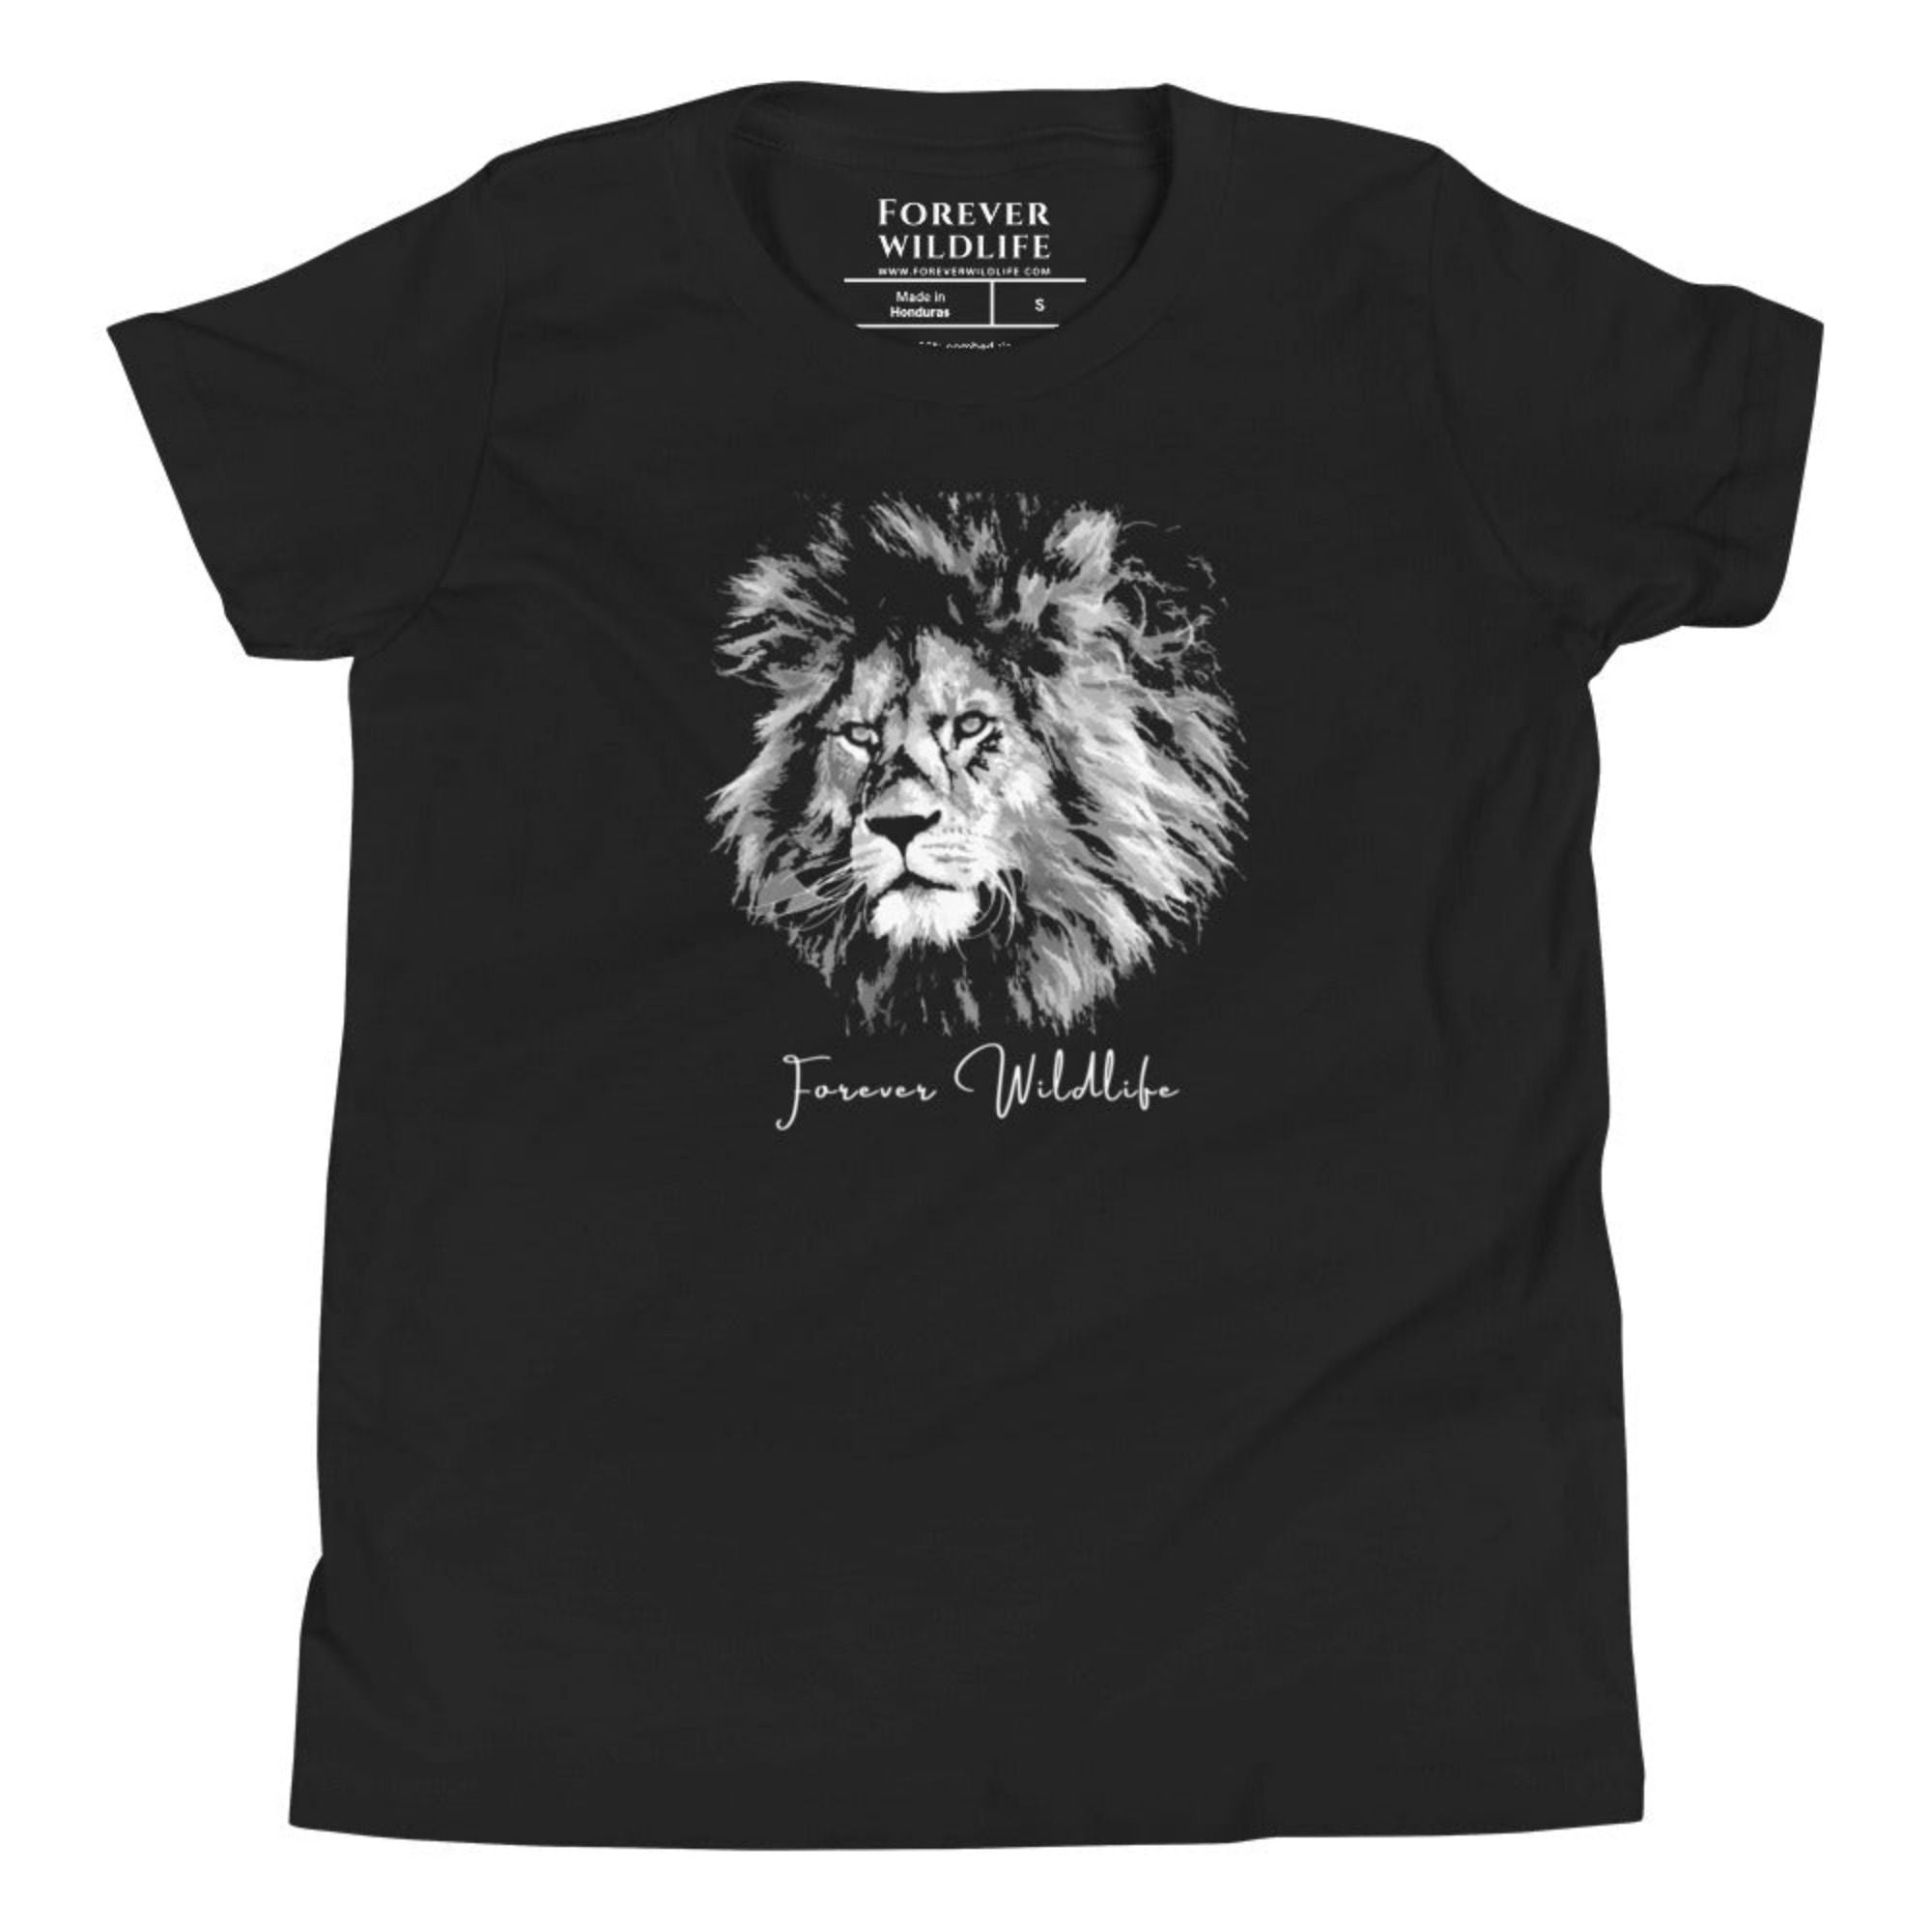 Black Youth T-Shirt with Lion graphic as part of Wildlife T Shirts, Wildlife Clothing & Apparel by Forever Wildlife